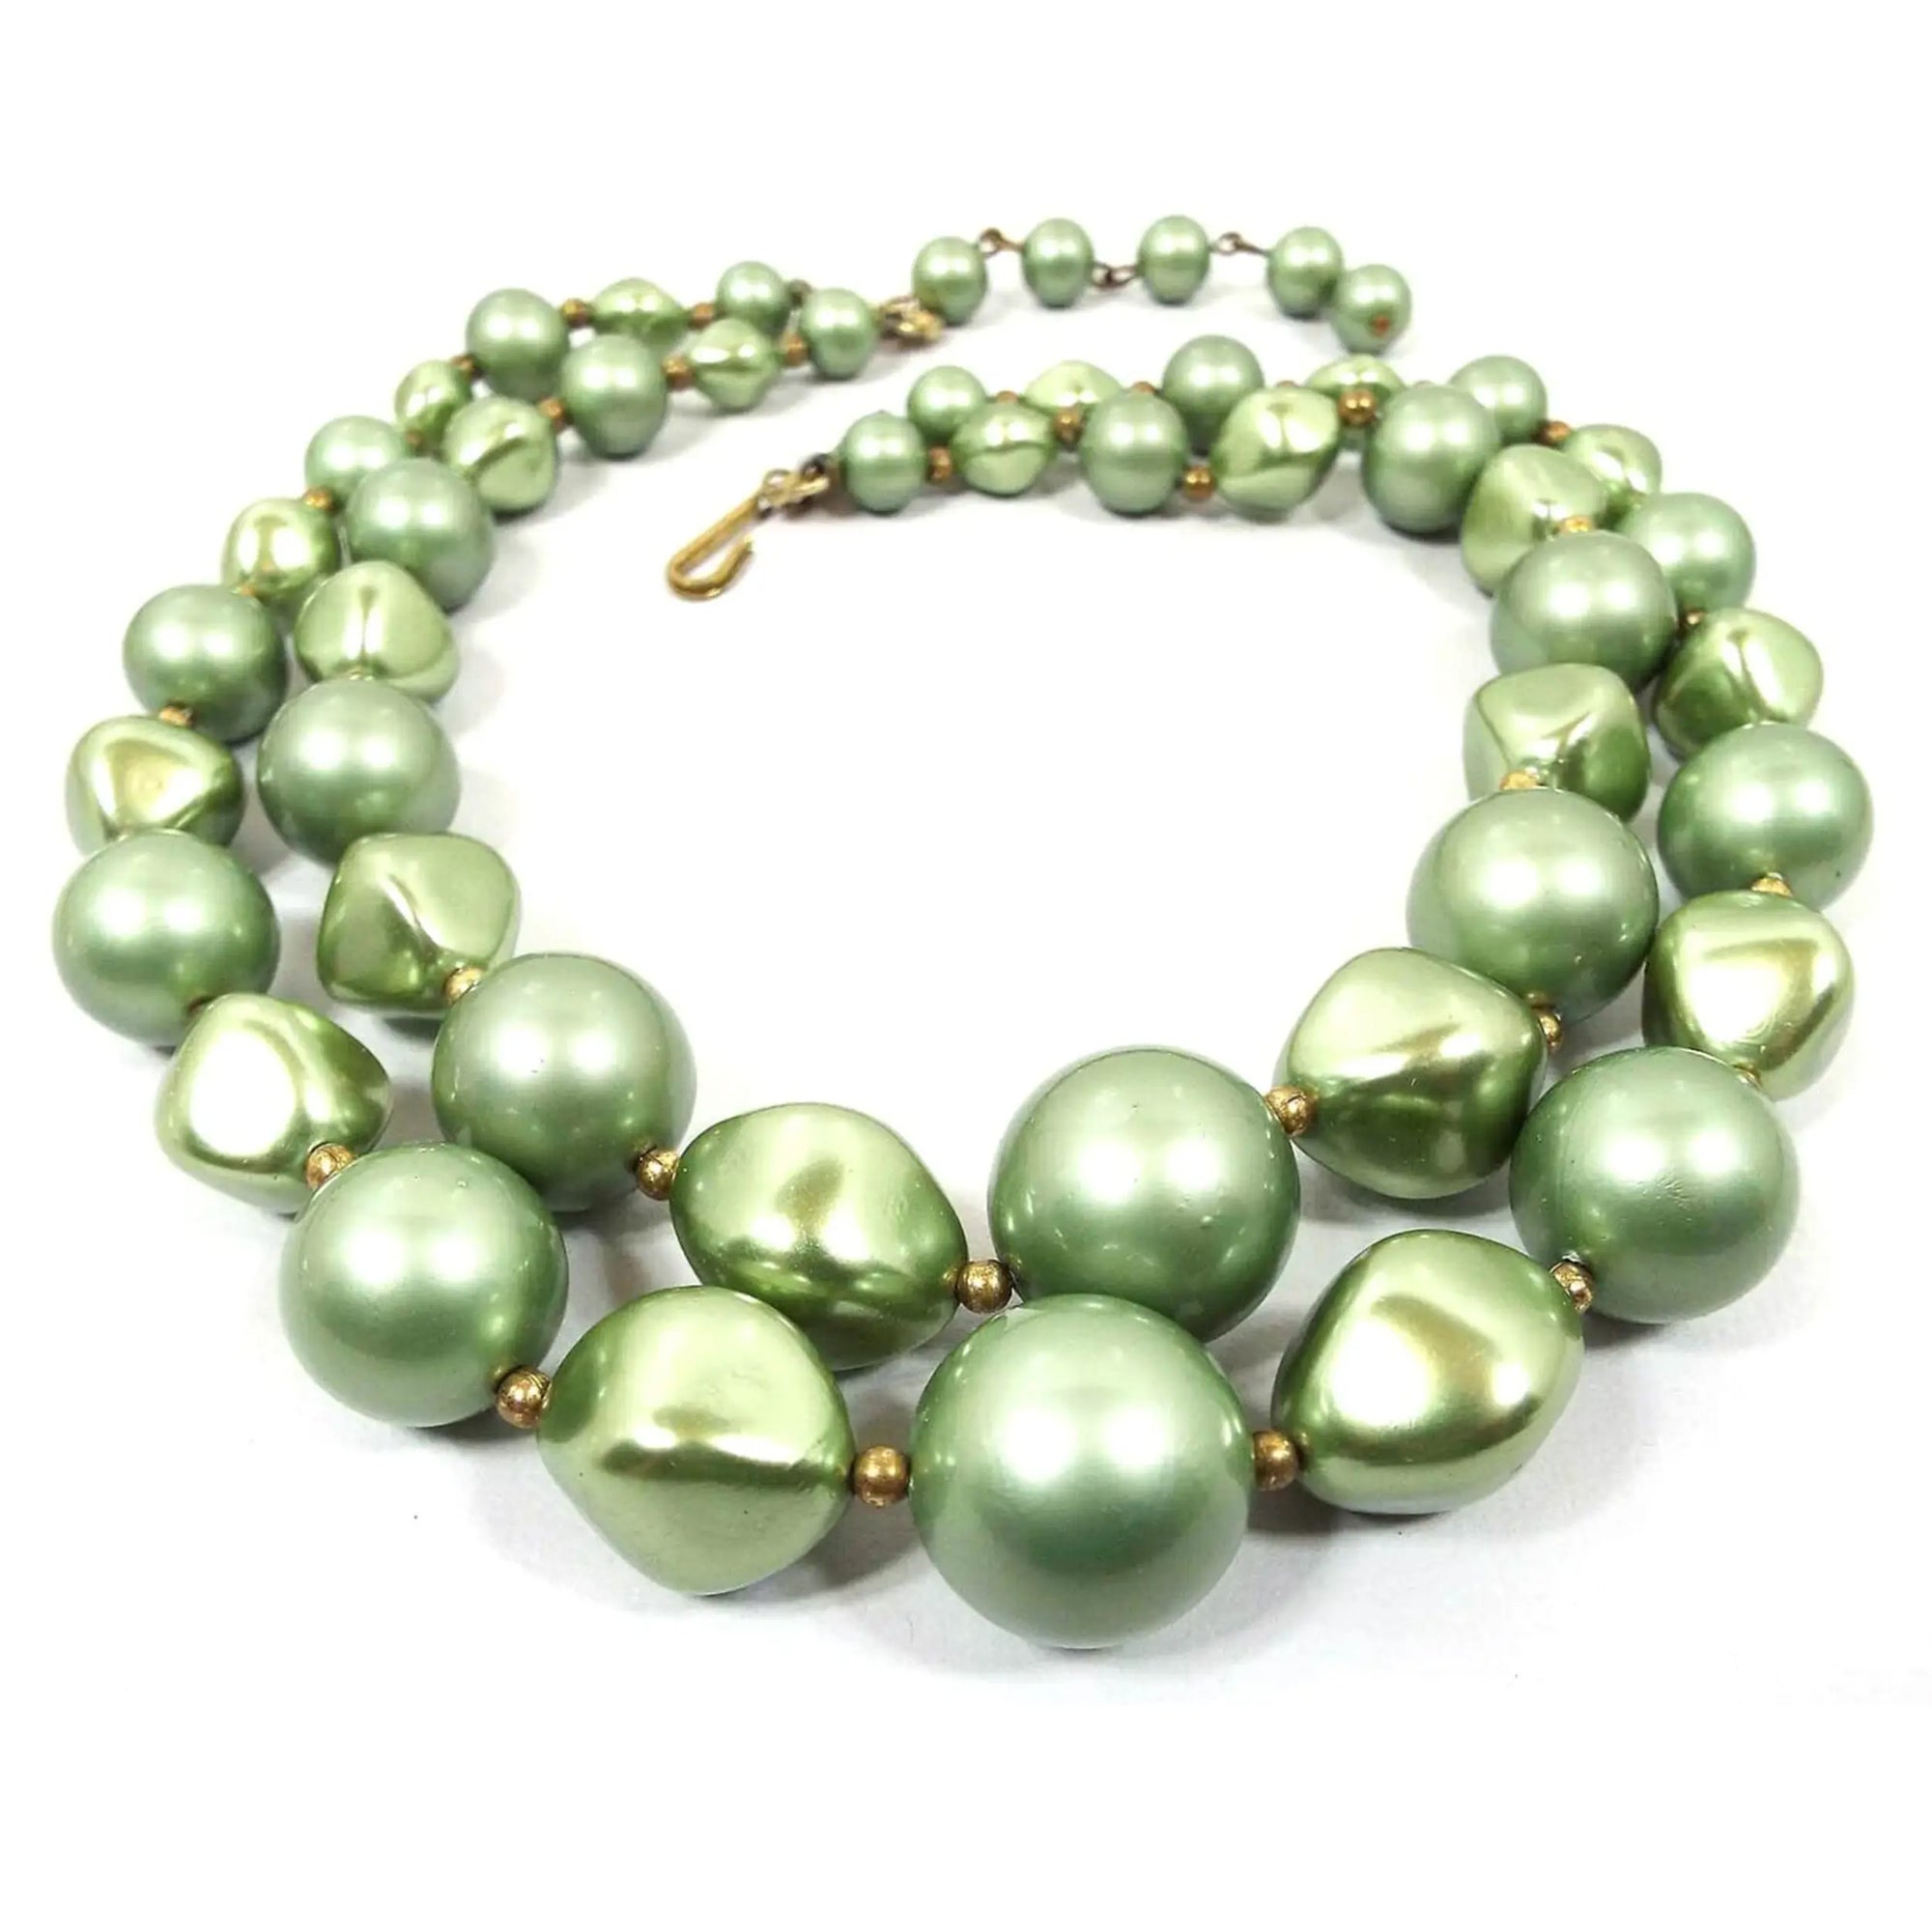 Top view of the Mid Century vintage multi strand beaded necklace. The necklace has two strands of beads. The beads alternate between round and angled oval and are sage green in color. There is a gold tone hook clasp at the end.